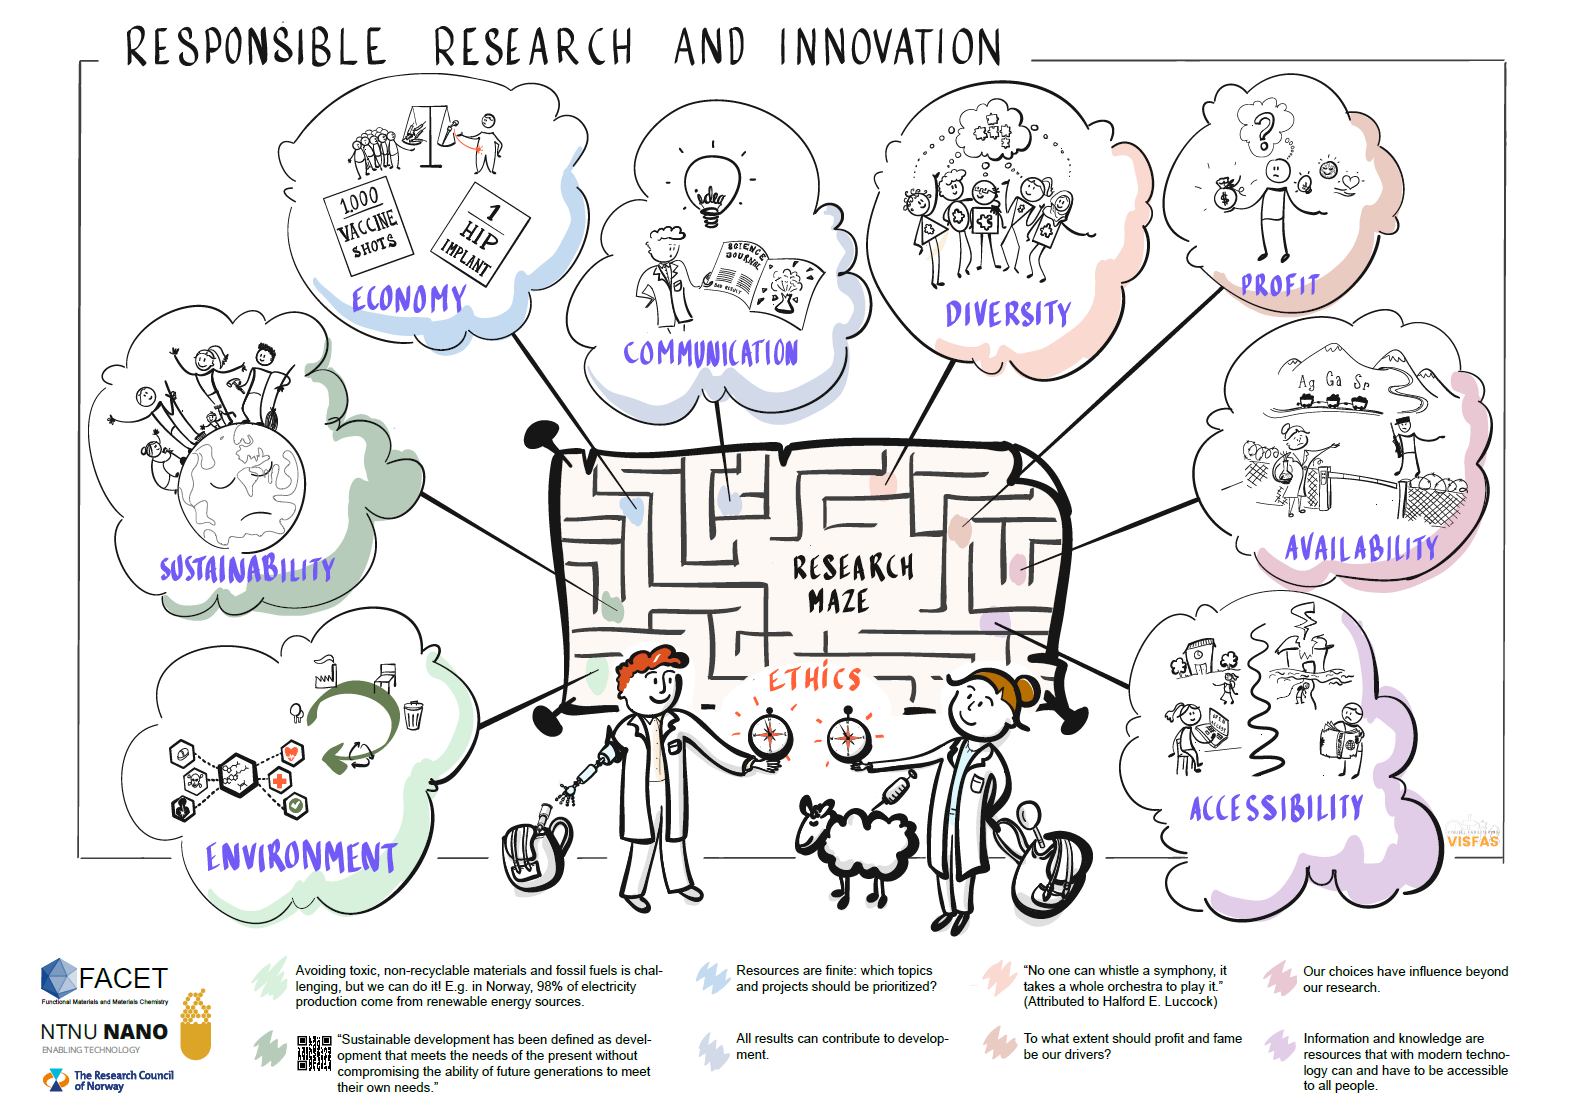 Responsible Reseach and Innovation Poster. Photo